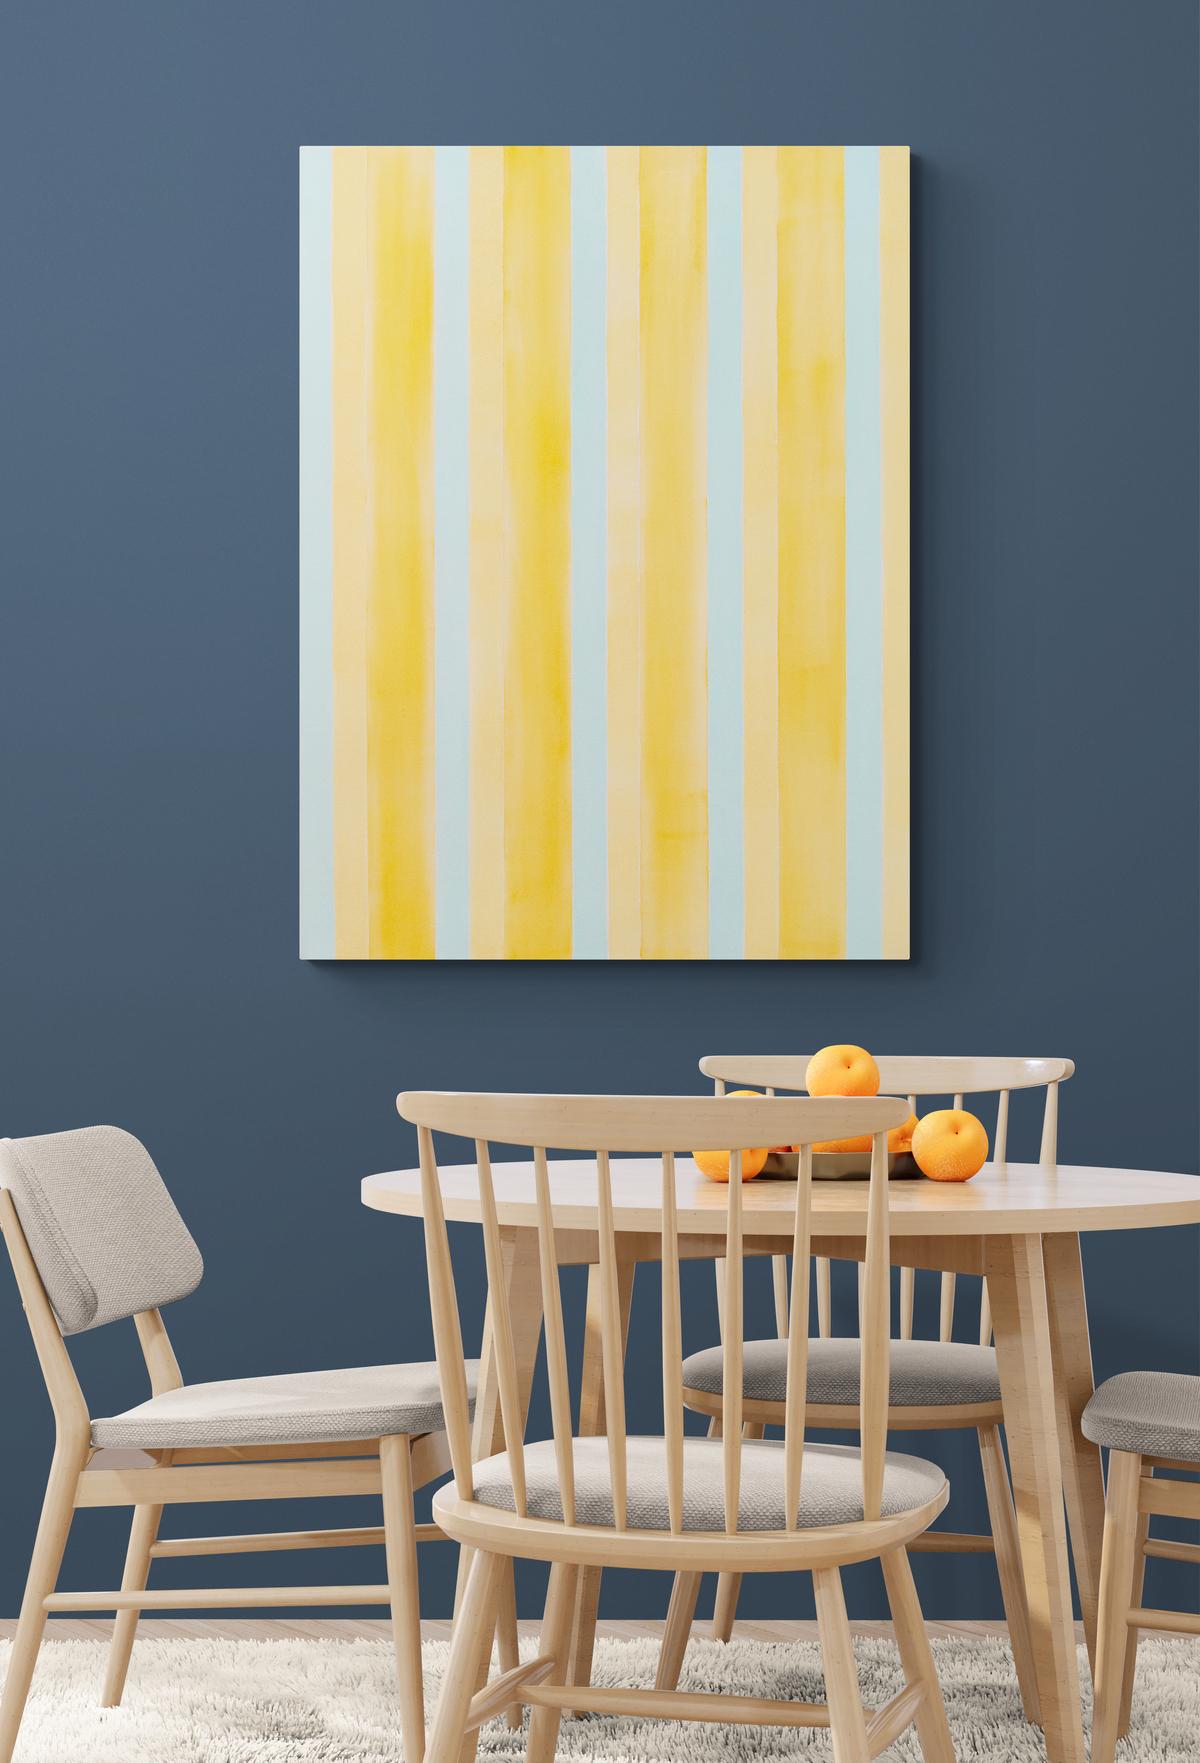 Breathing Space for Agnes - large, bright, yellow, stripes, acrylic on canvas - Orange Abstract Painting by Milly Ristvedt